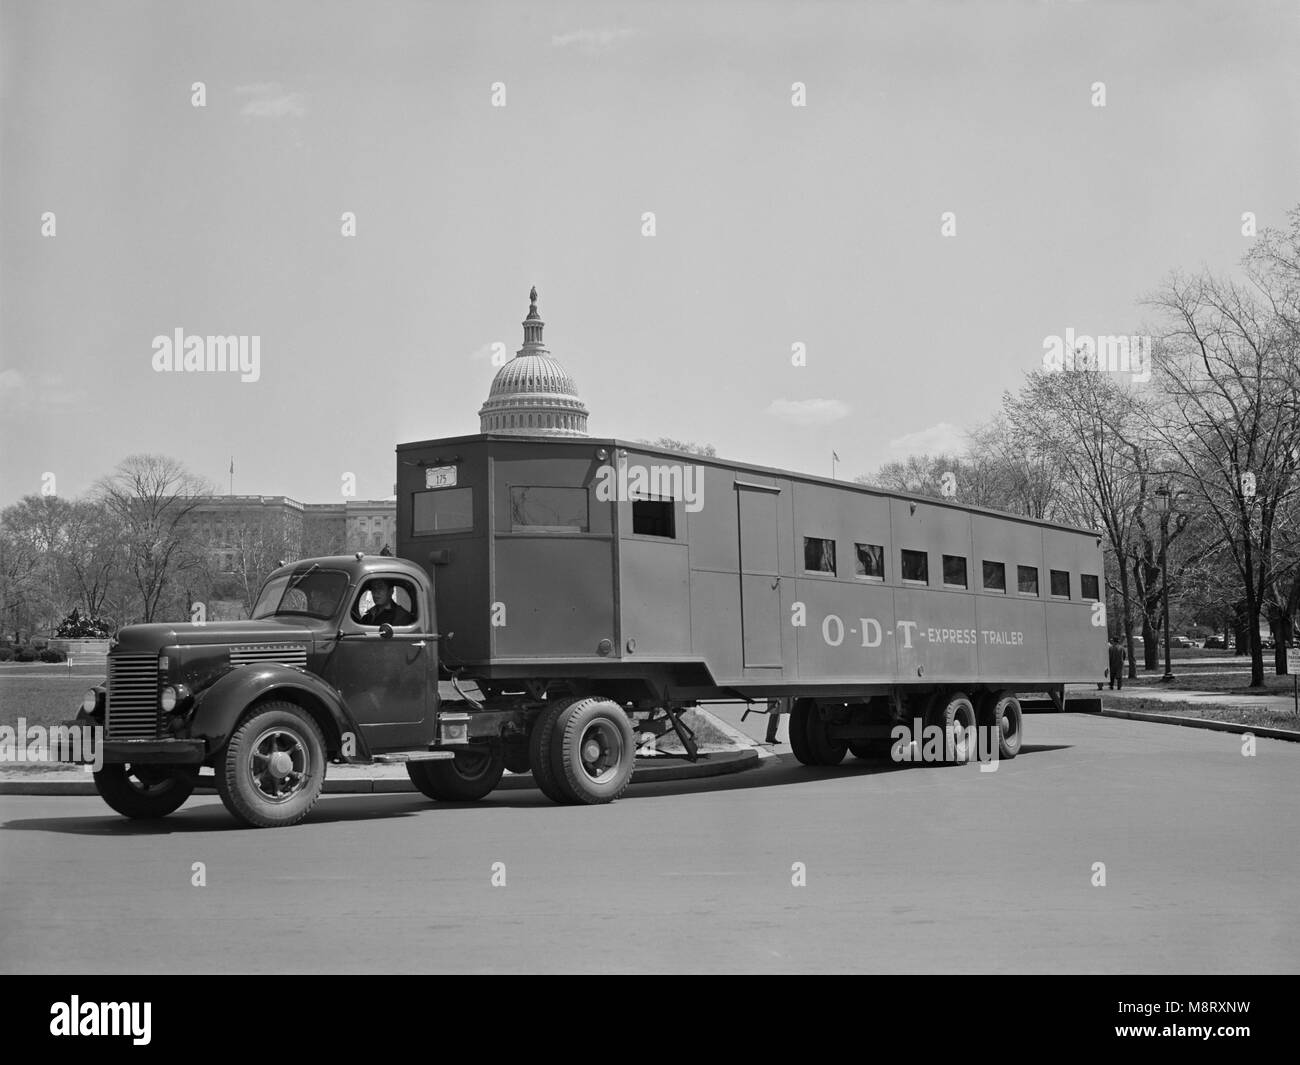 New Oversized Trailer Designed and Built by the Office of Defense Transportation and War Production Board (WPB) officials with the Cooperation of Private Companies, Made Entirely of Non-Critical Materials, used to Transport Defense Workers to Outlying Industrial Plants, Washington DC, USA, by Albert Freeman for Office of War Information, March 1942 Stock Photo